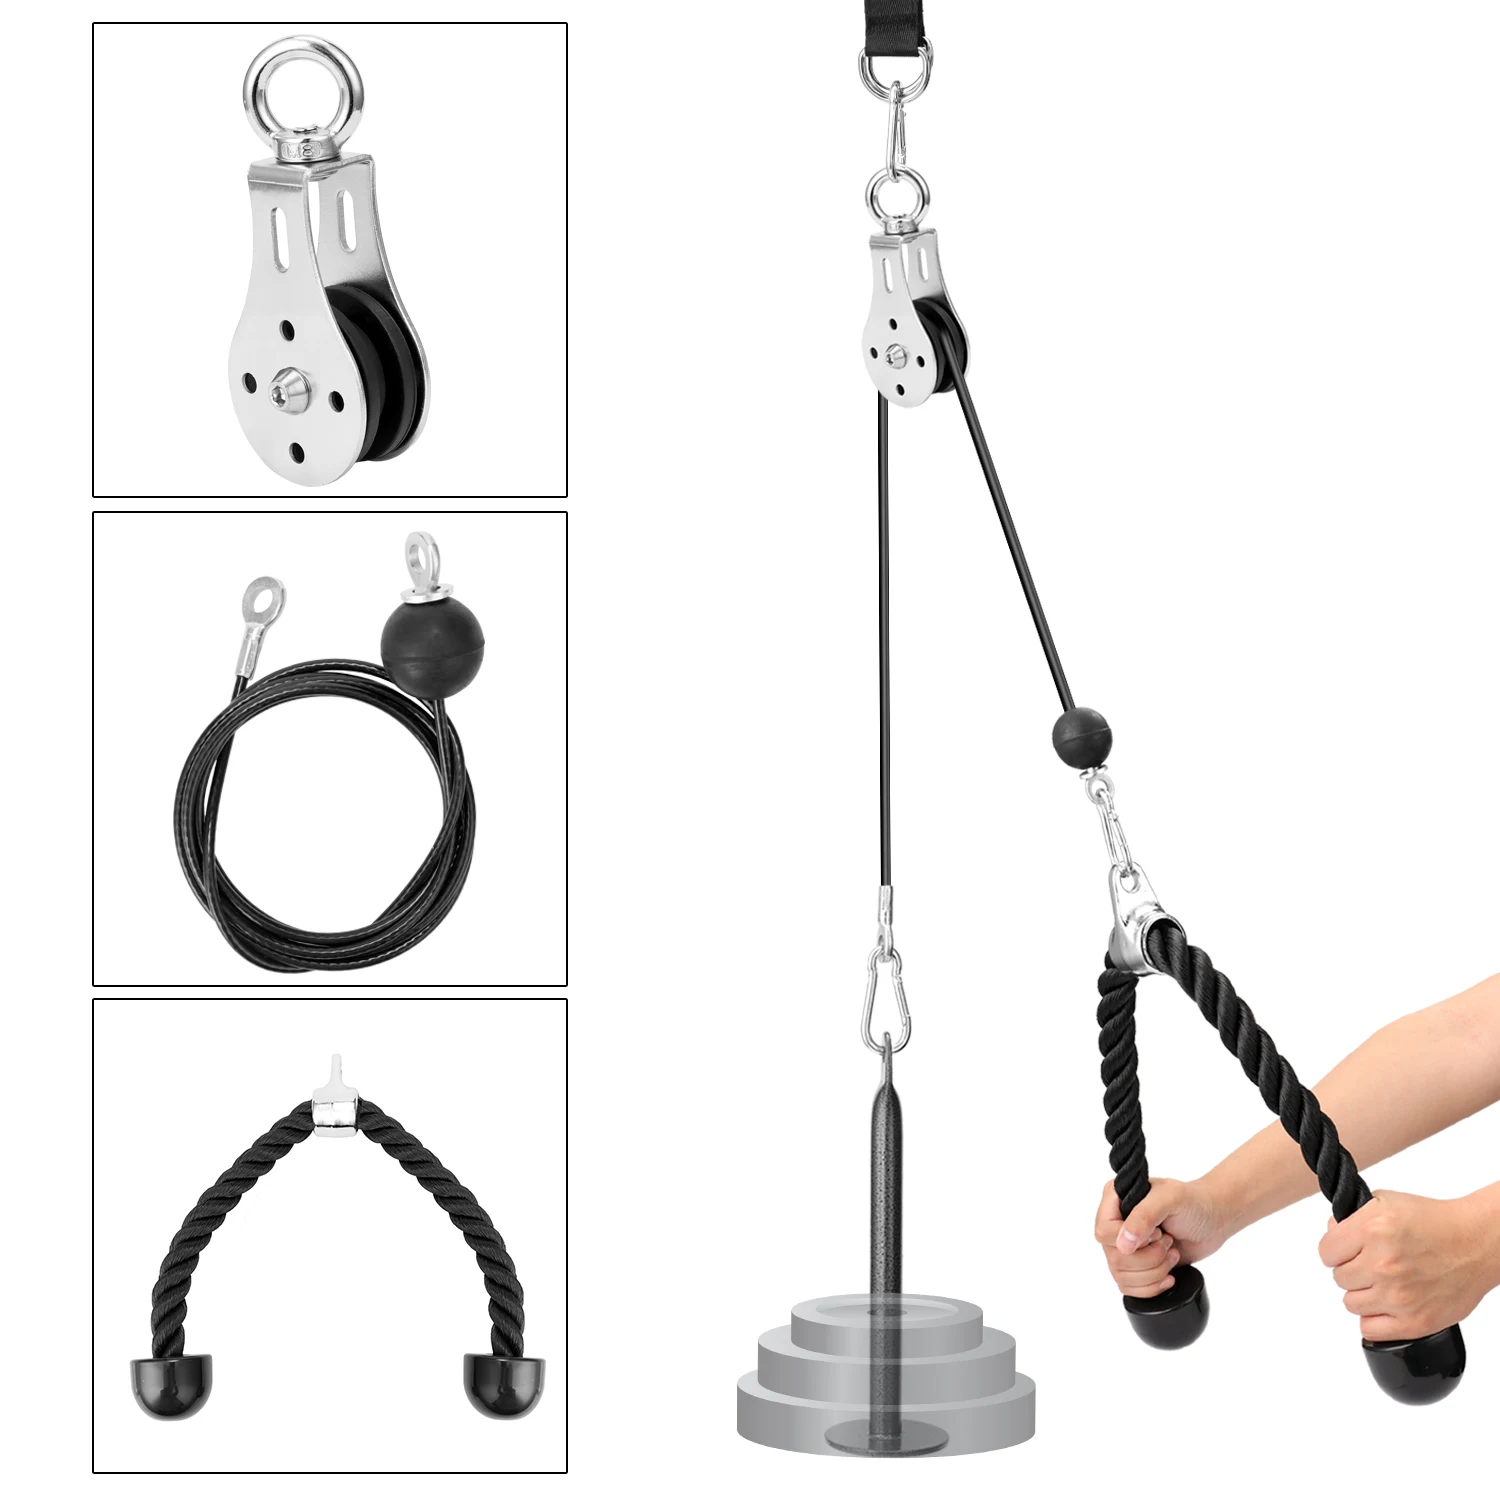 Fitness DIY Pulley Cable Machine Attachment System Arm Biceps Triceps 